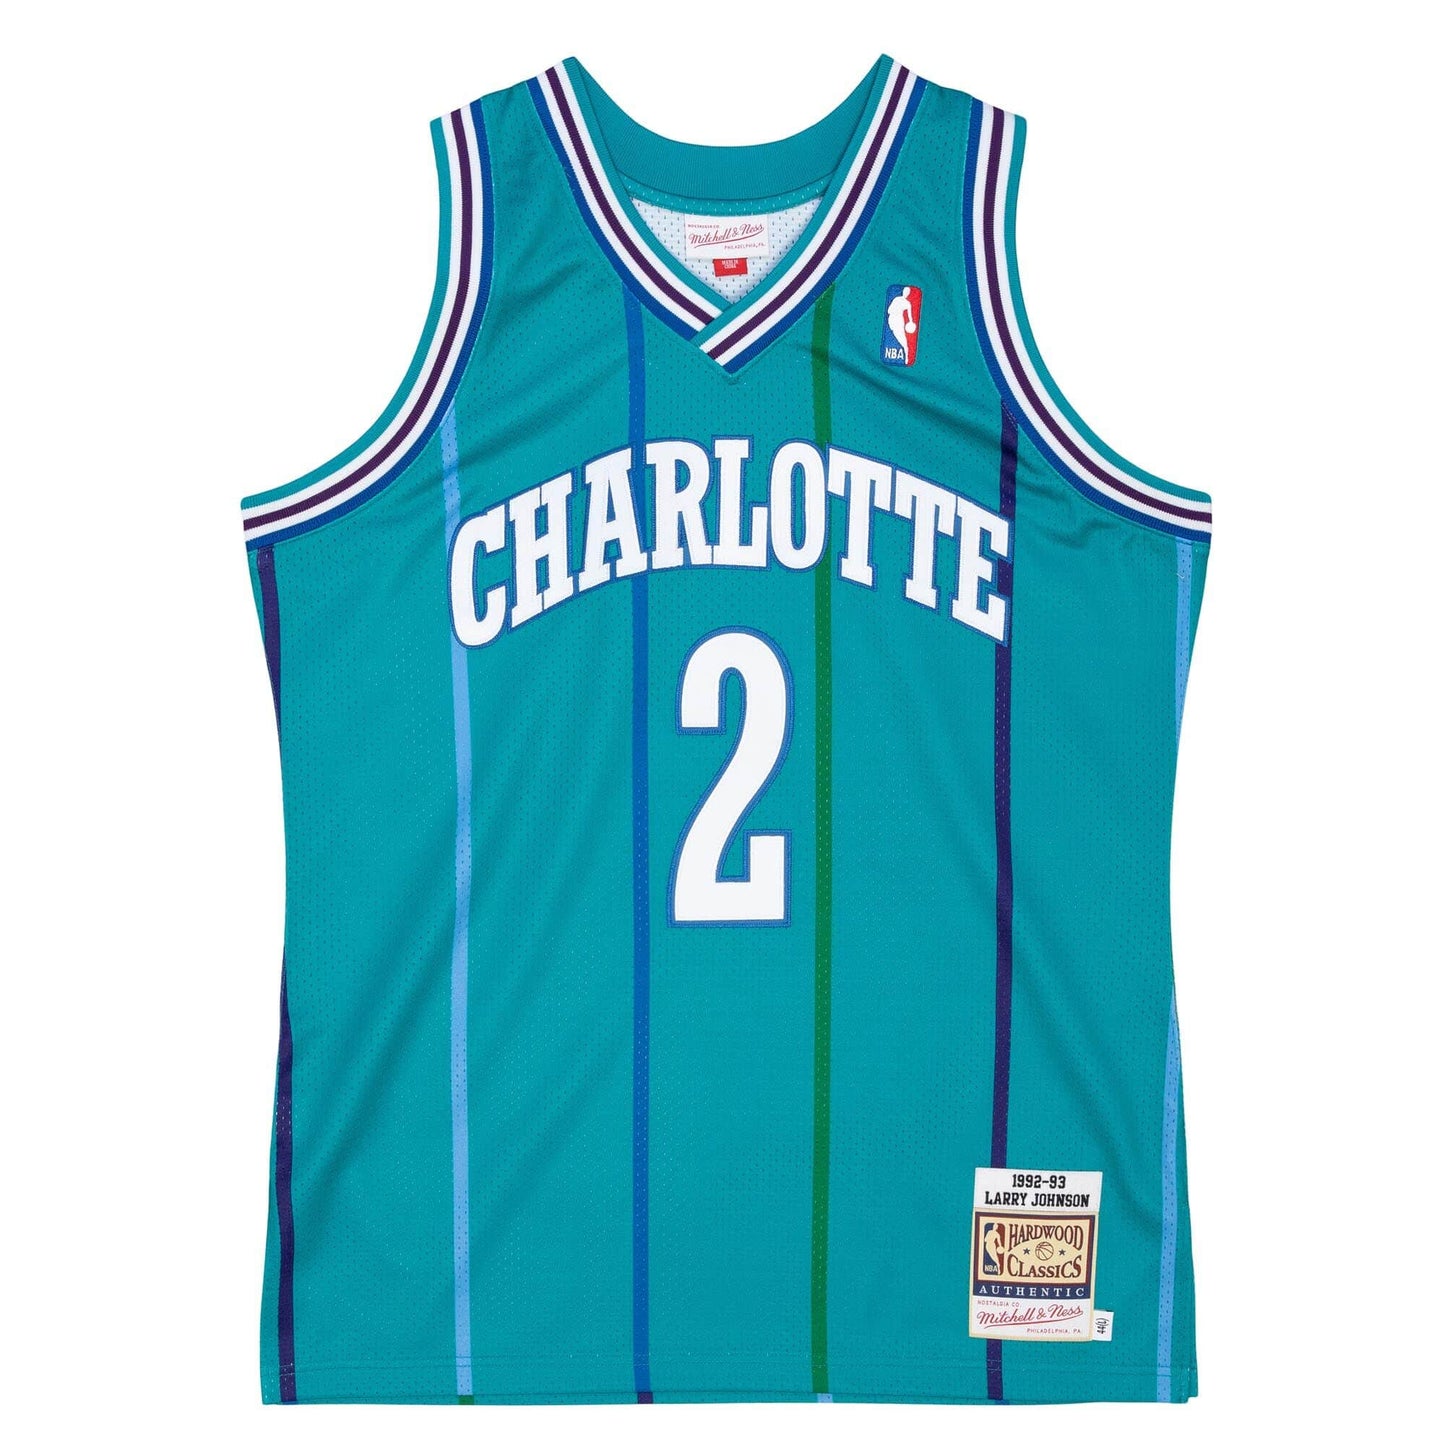 Authentic Larry Johnson Charlotte Hornets Road 1992-93 Jersey